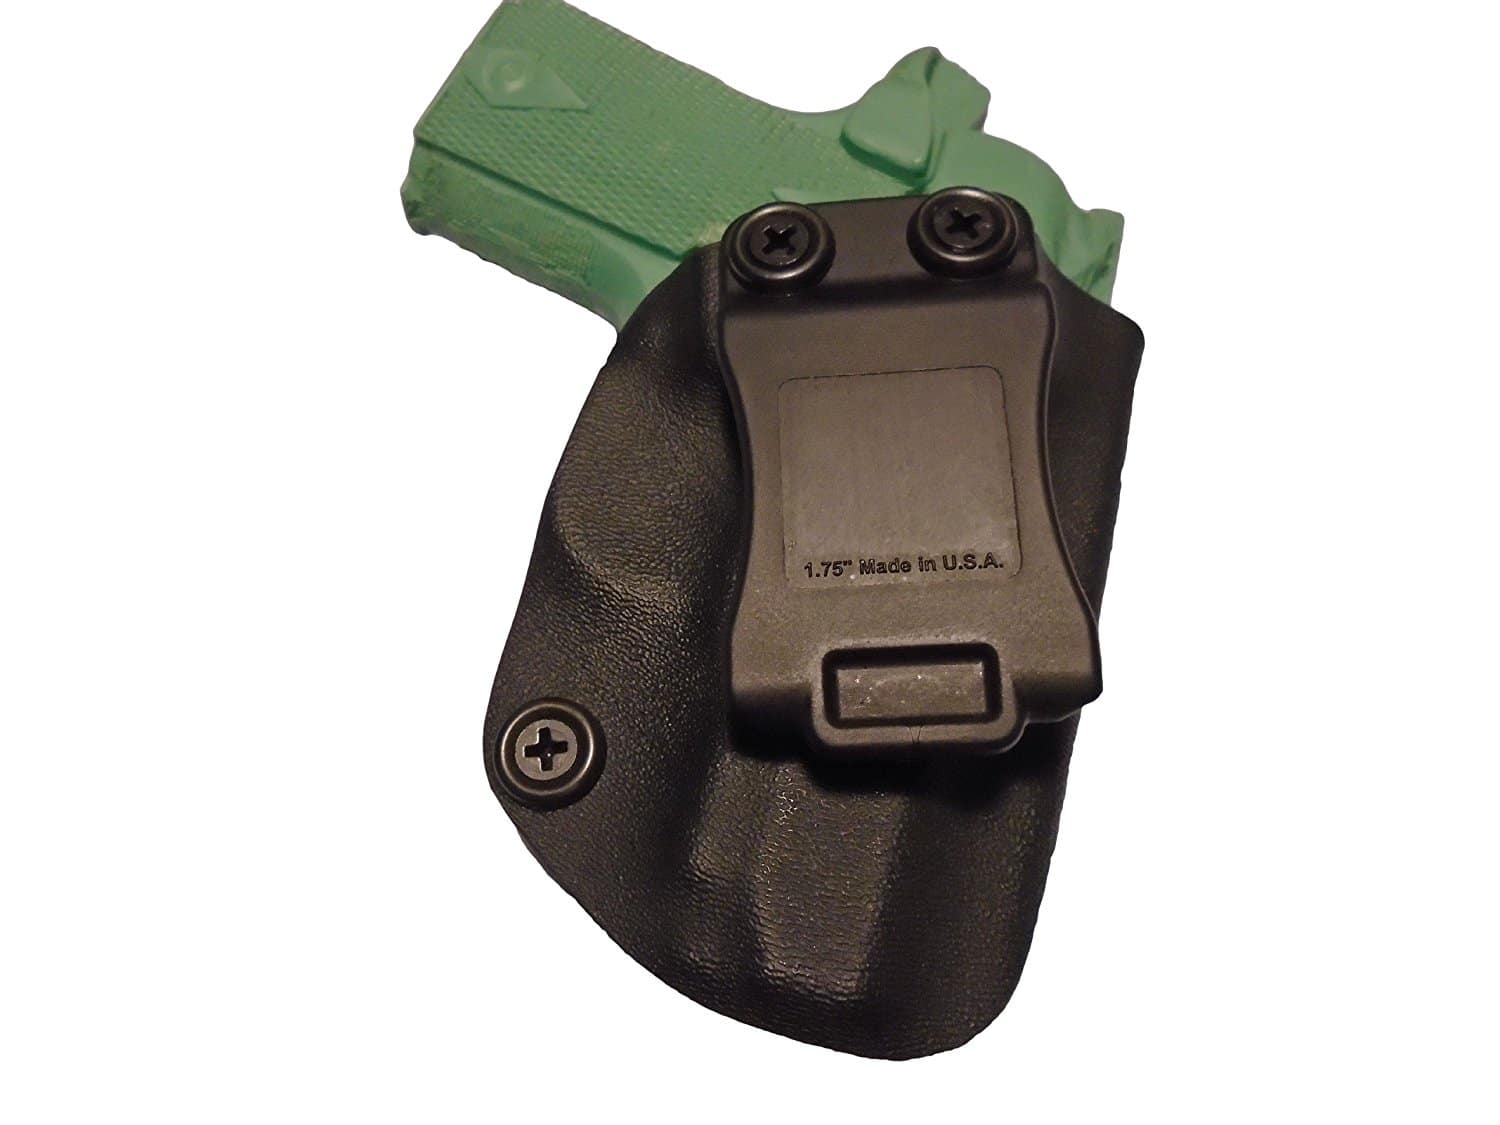  IWB Holster by Badger Concealment